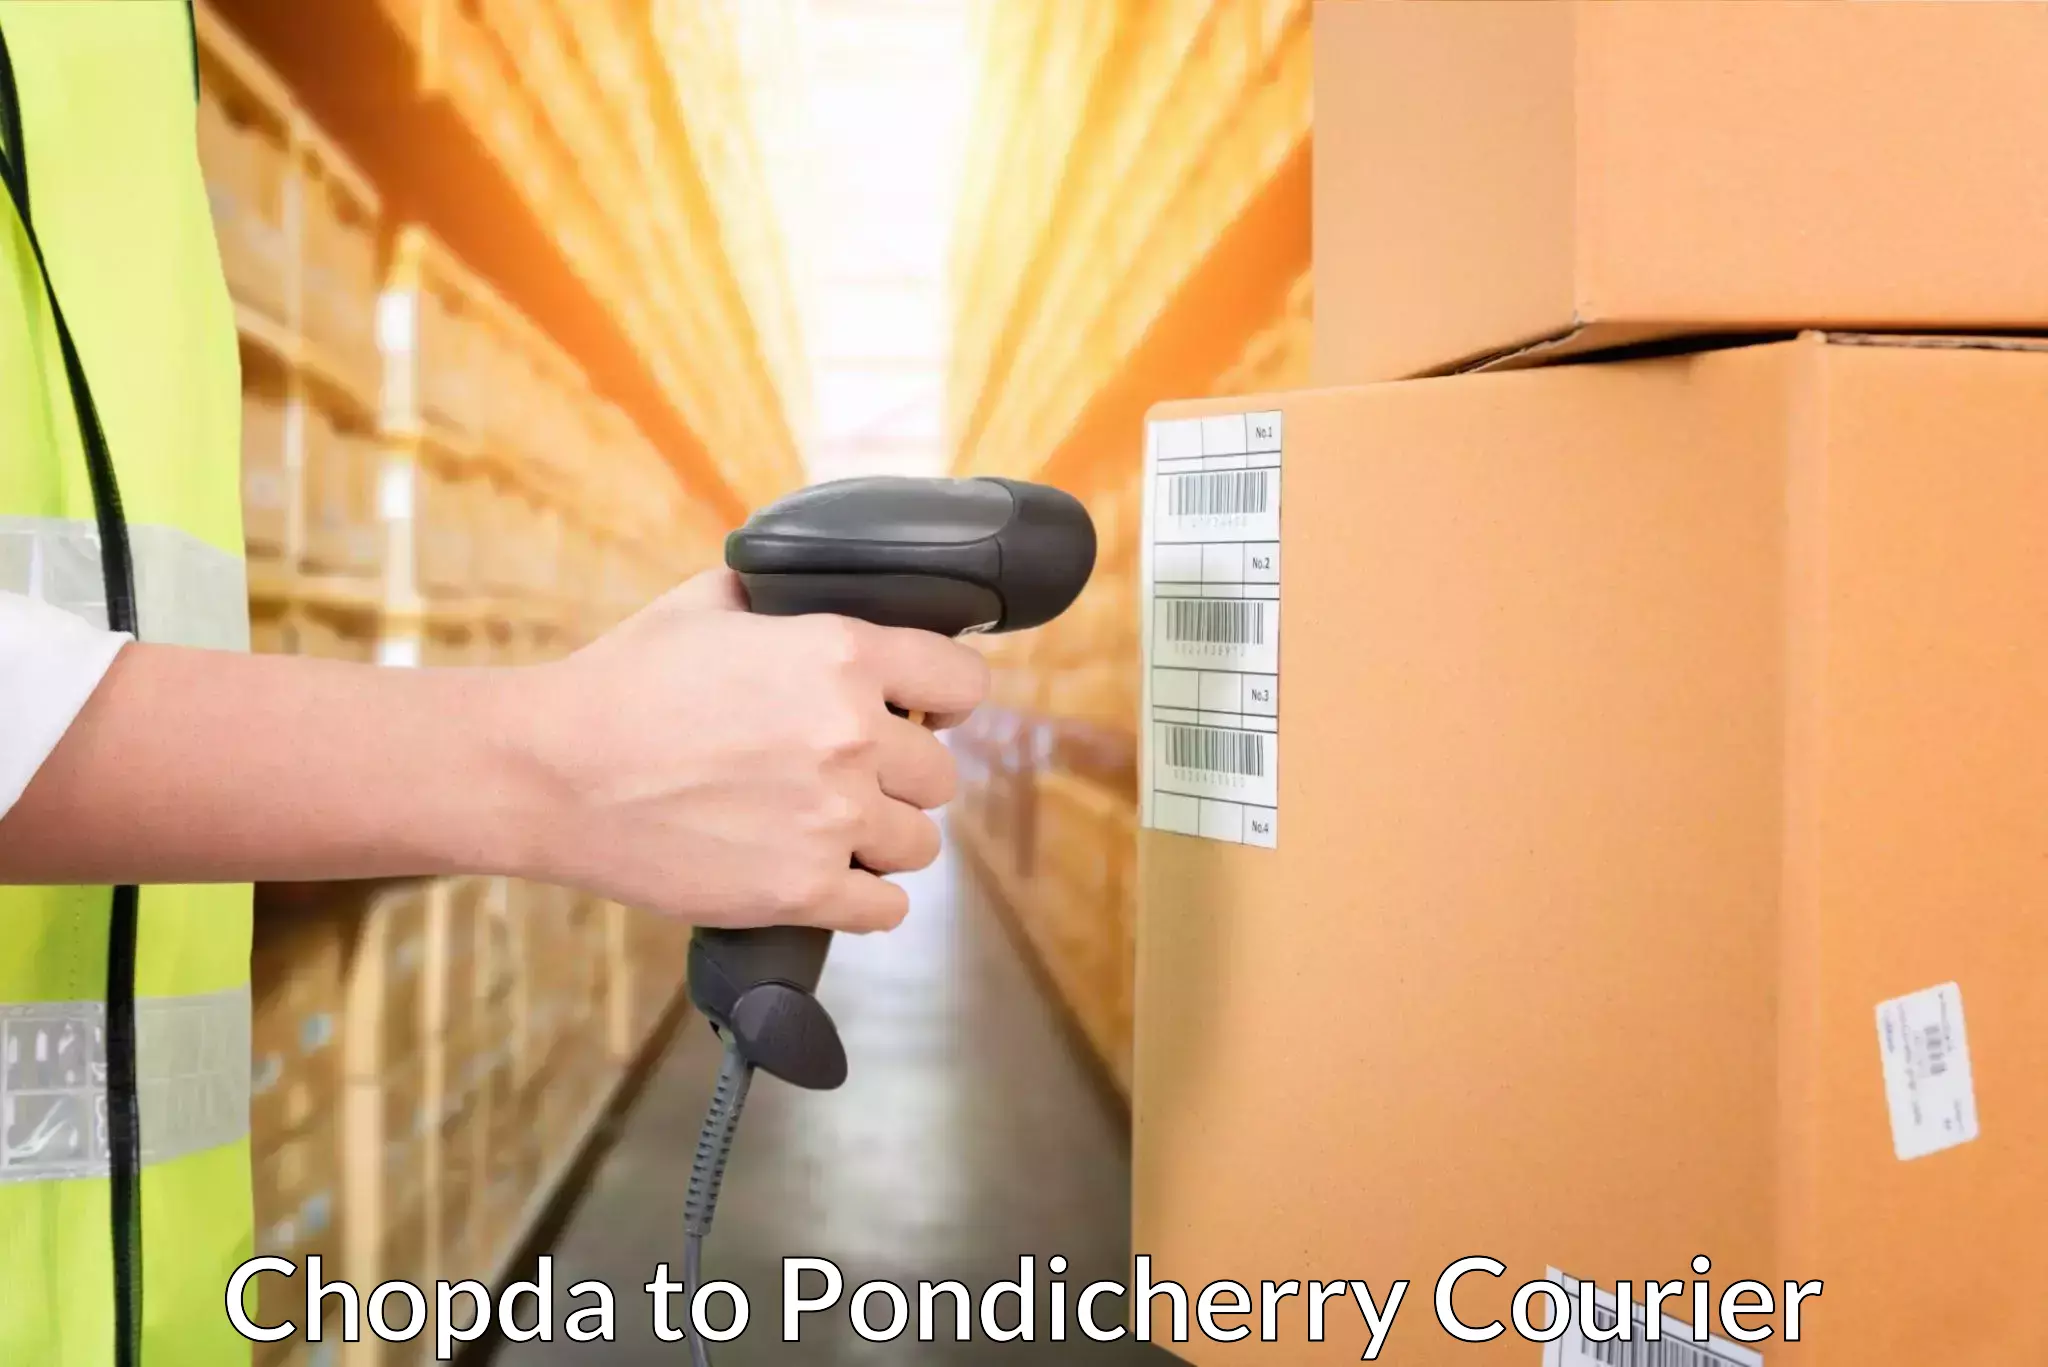 State-of-the-art courier technology Chopda to Pondicherry